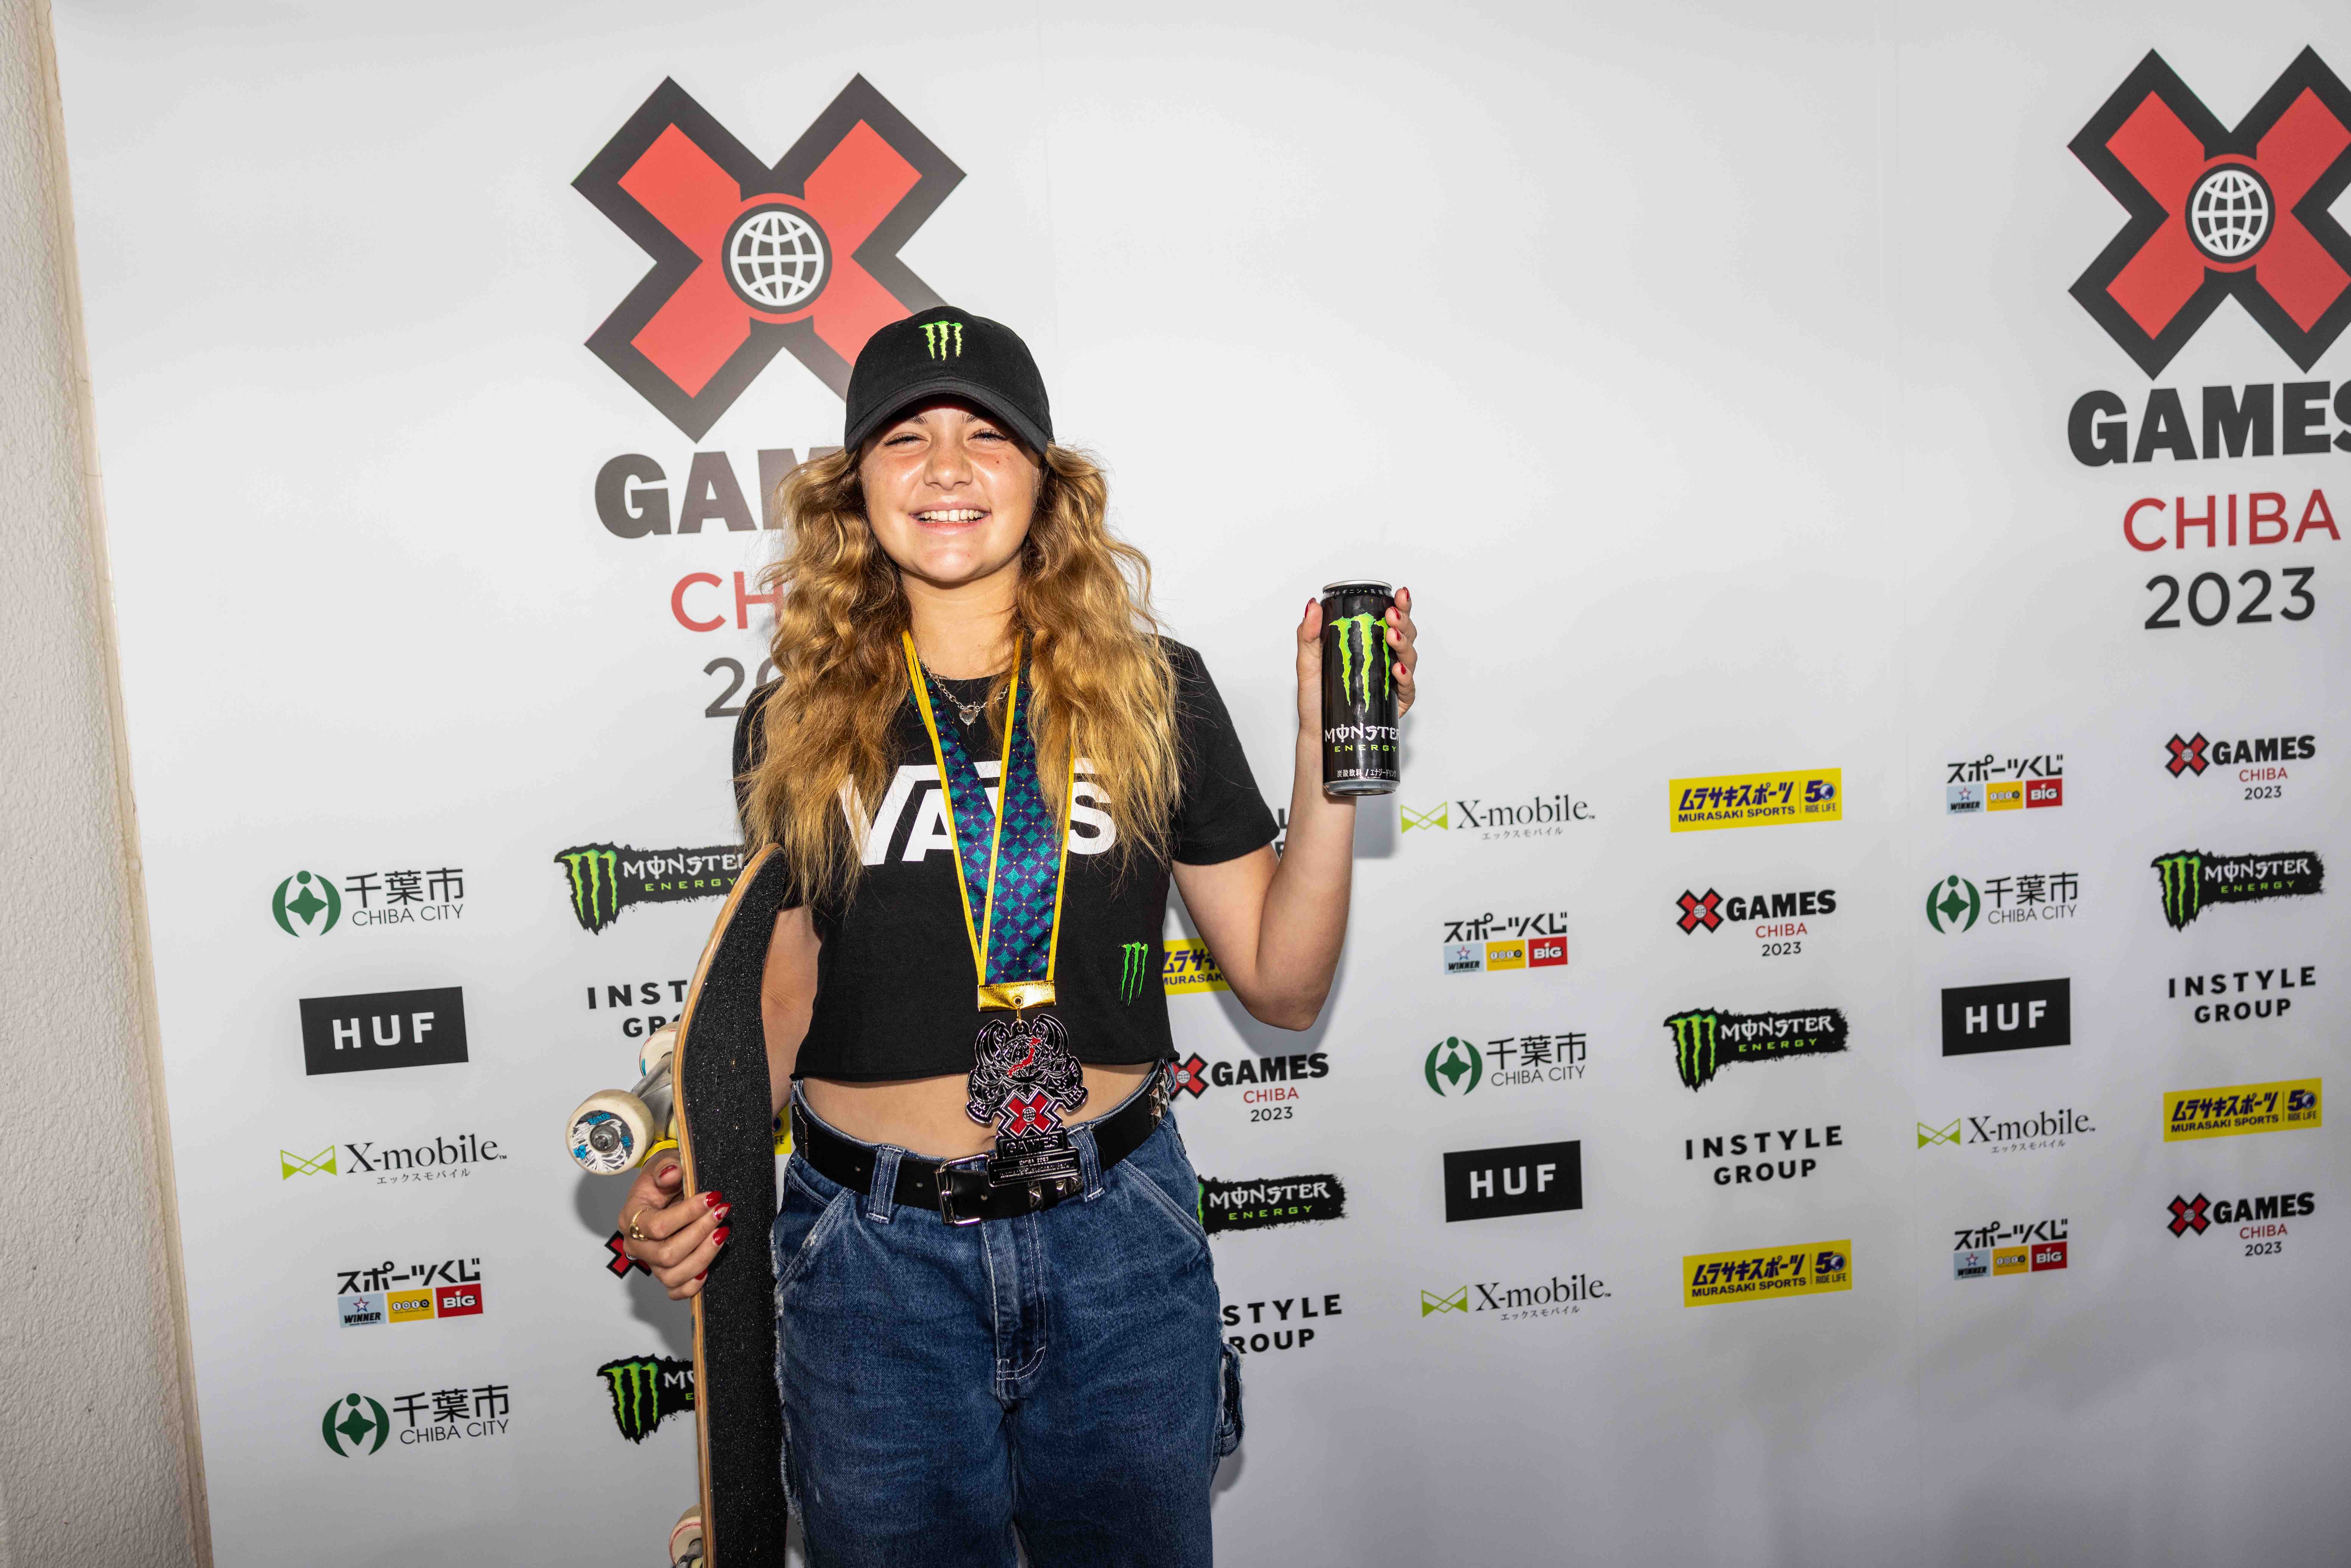 Monster Army's Ruby Lilley Wins Silver in Women's Skateboard Park at X Games Chiba 2023